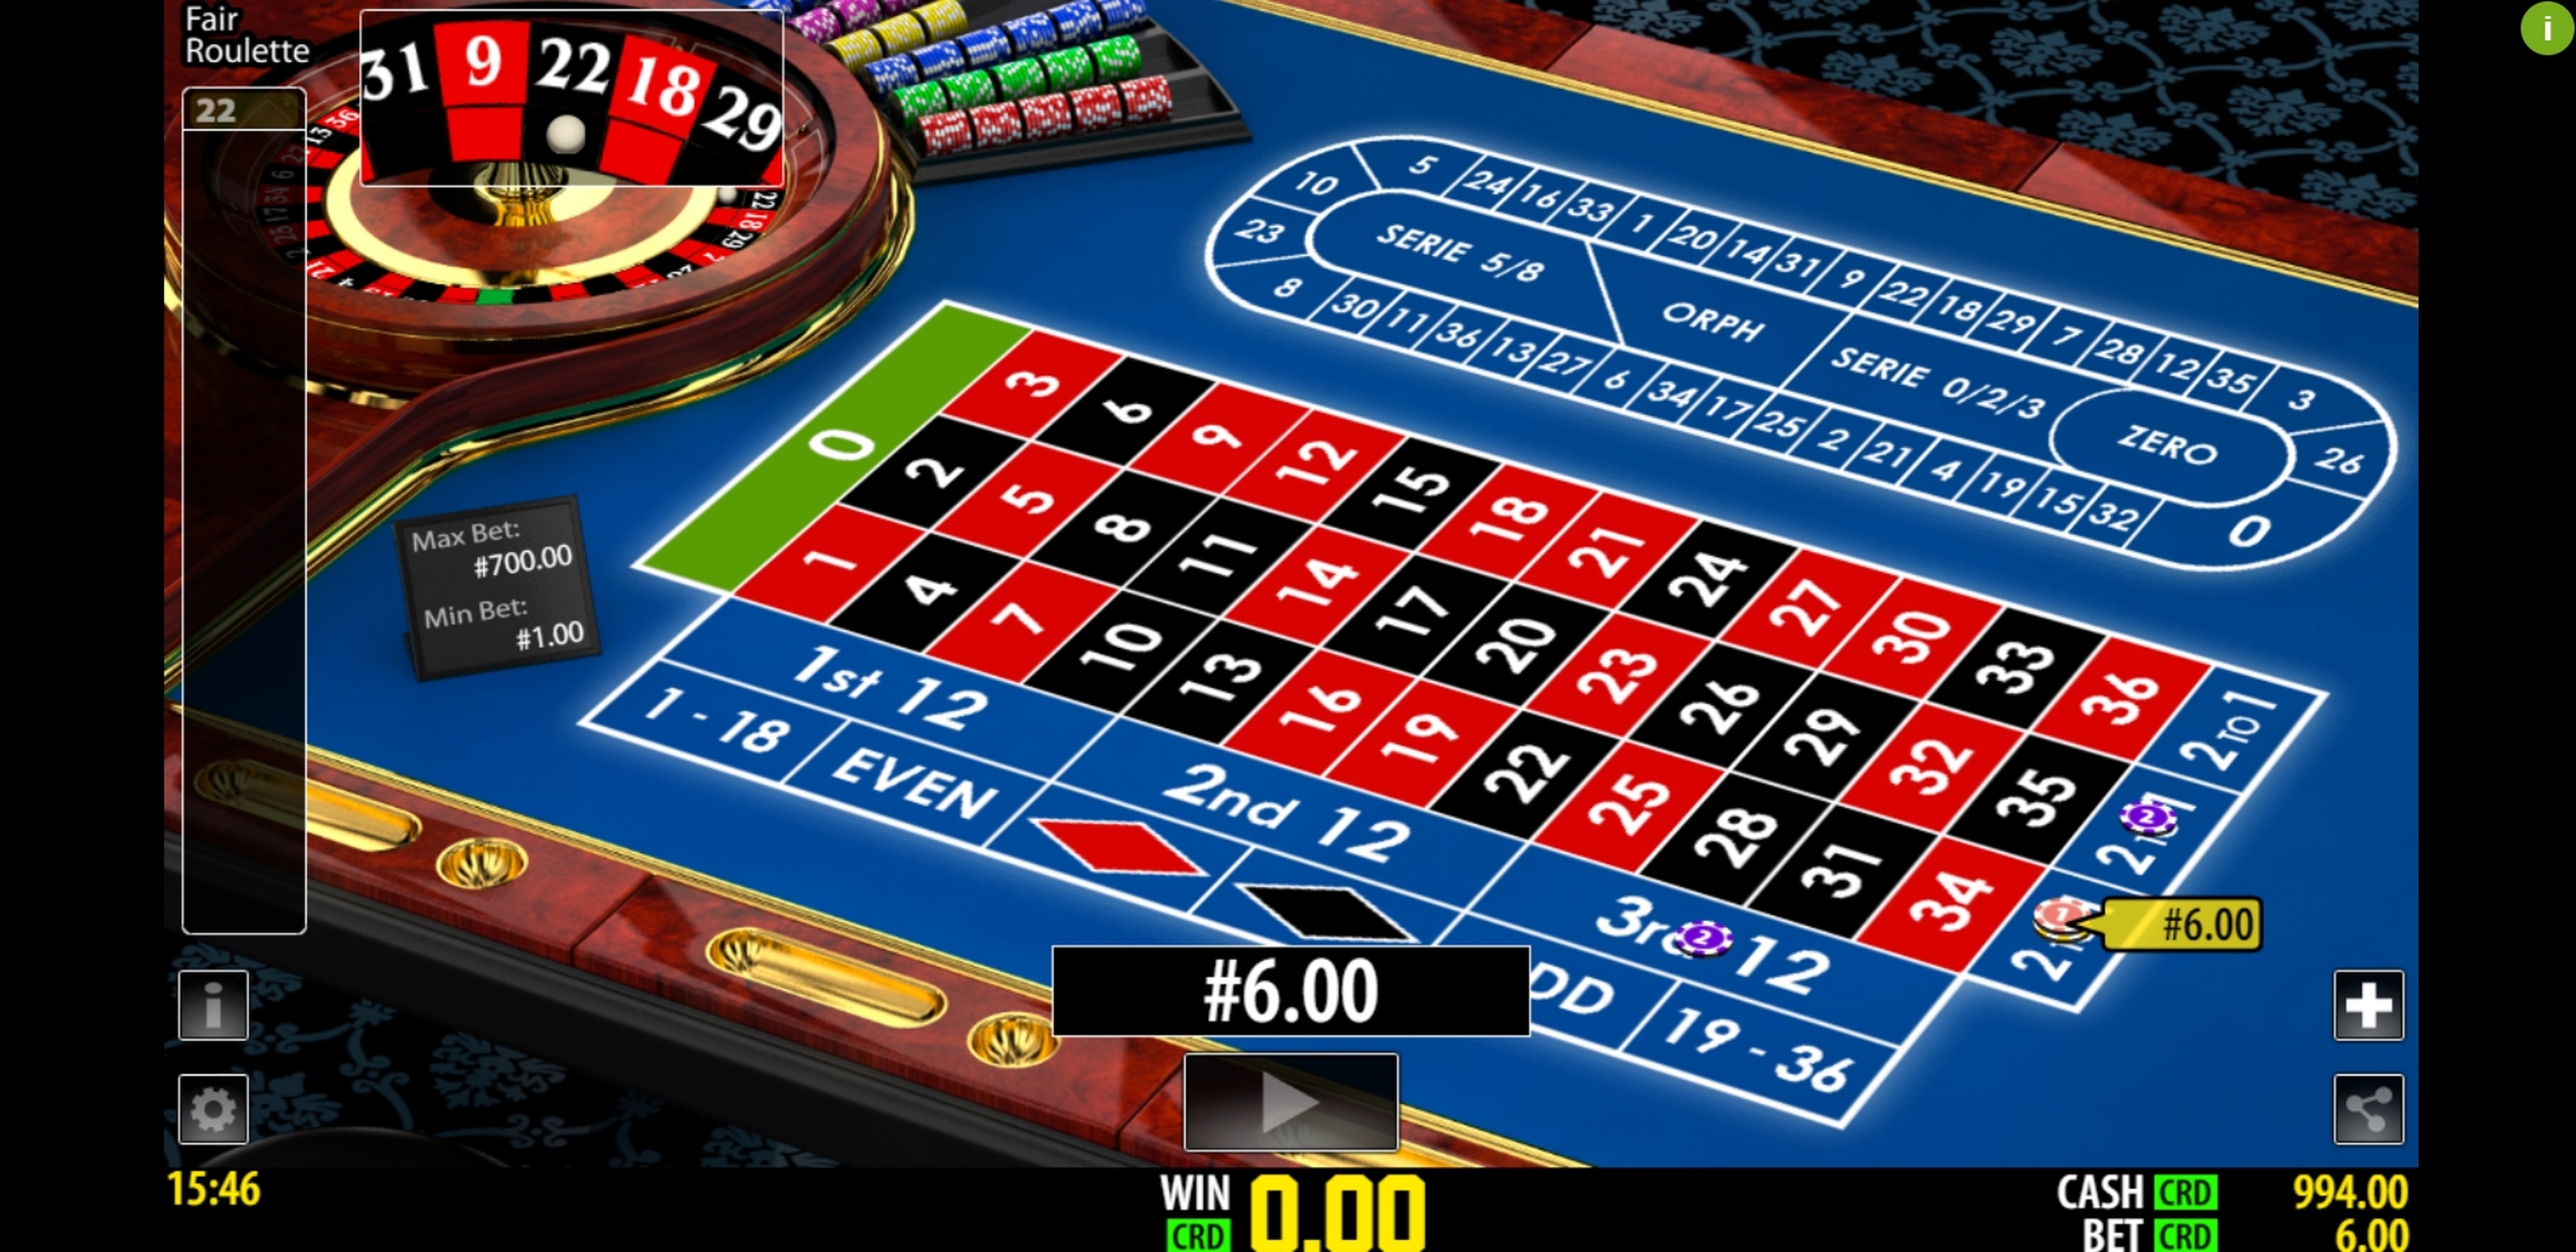 Win Money in Fair Roulette Pro Free Slot Game by World Match